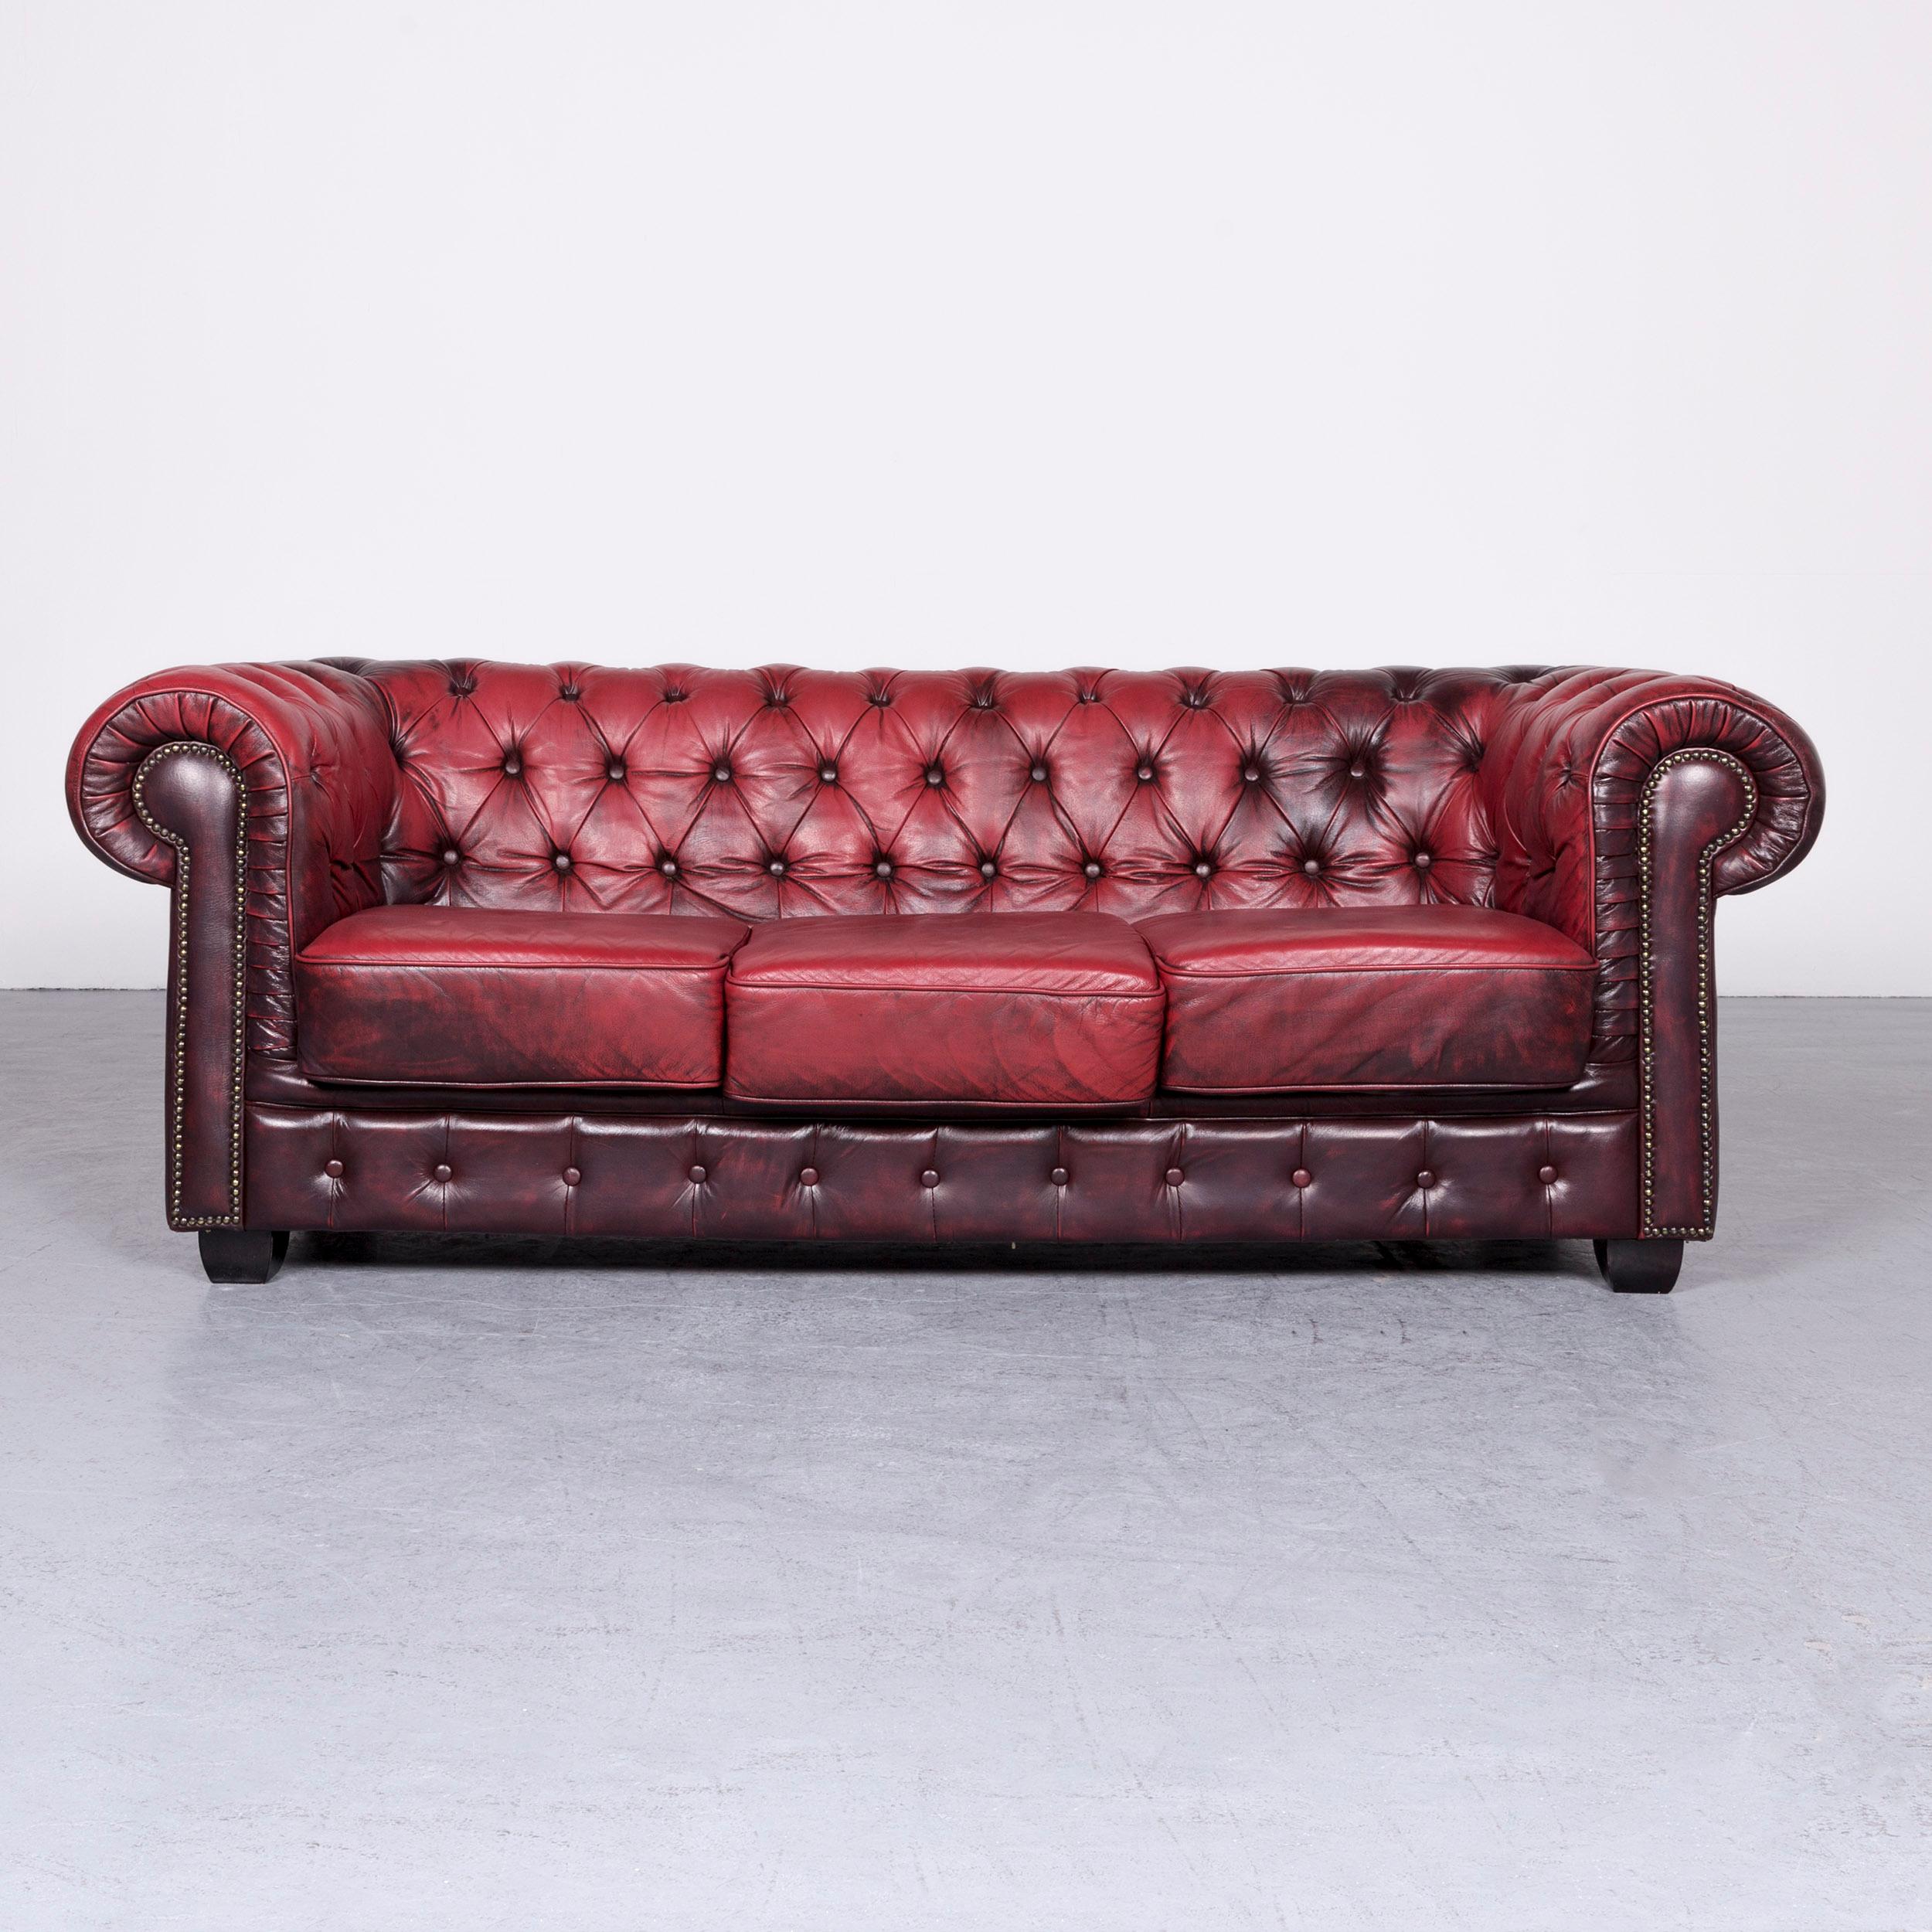 We bring to you a Chesterfield leather sofa set red two-seat three-seat vintage couch.



























 